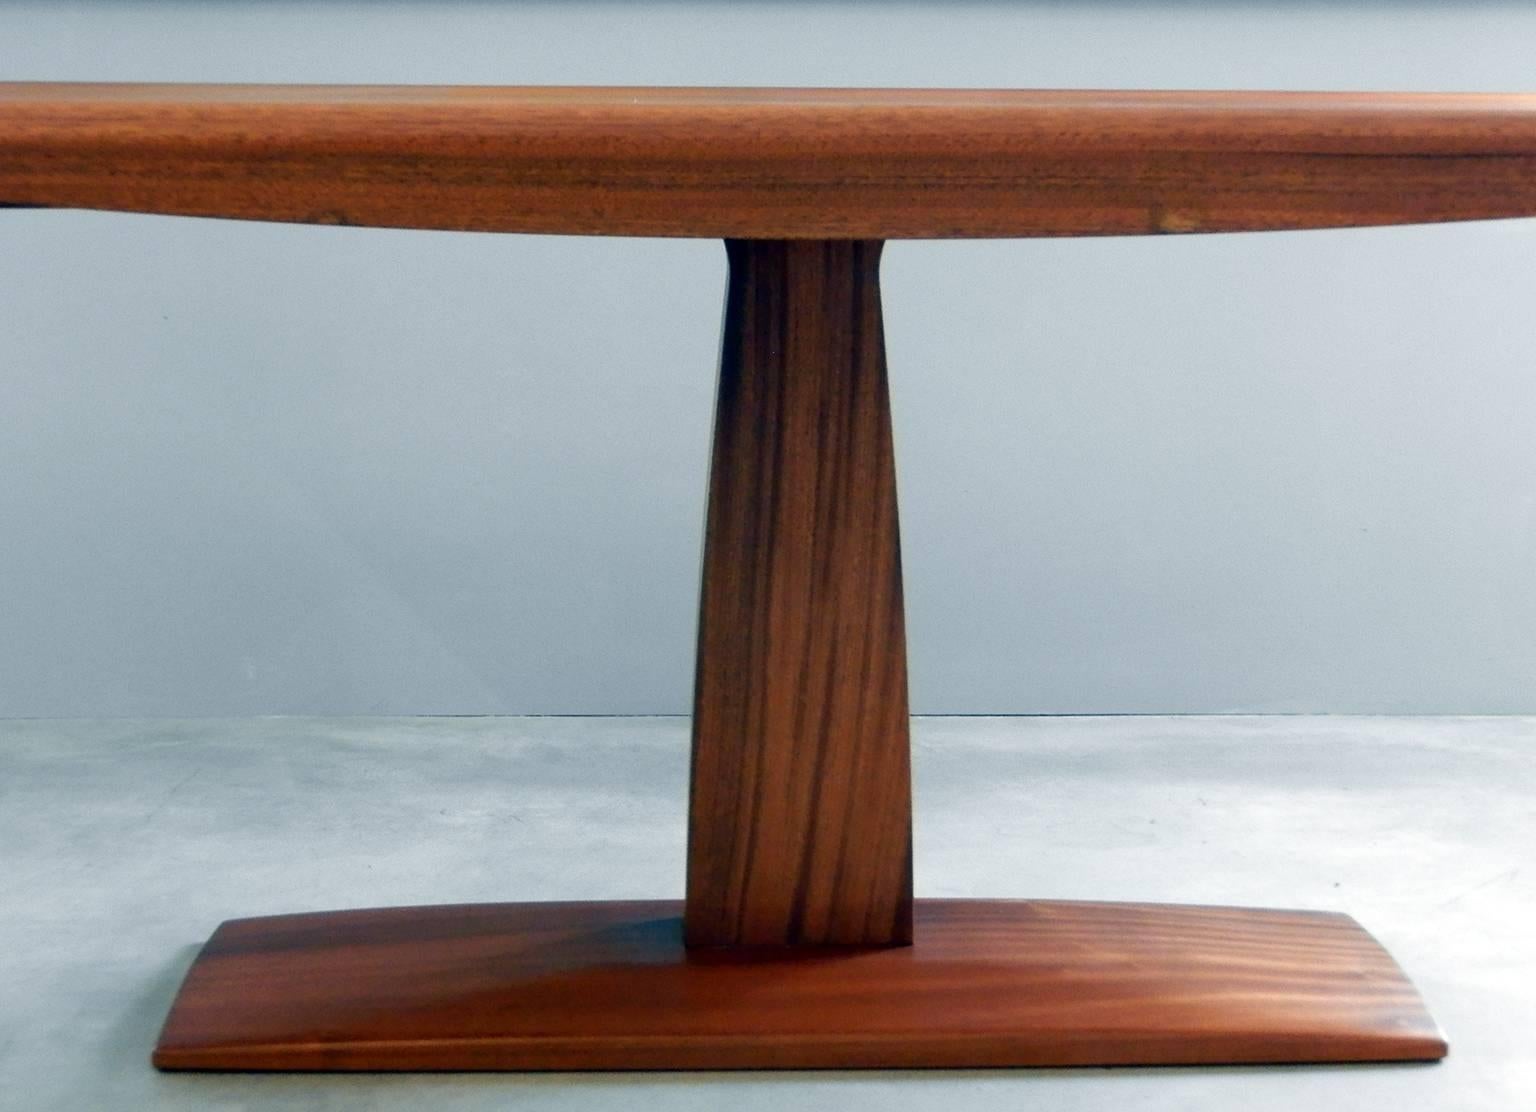 Hand-Crafted Handmade Contemporary Italian Design Mahogany One-Leg Table For Sale